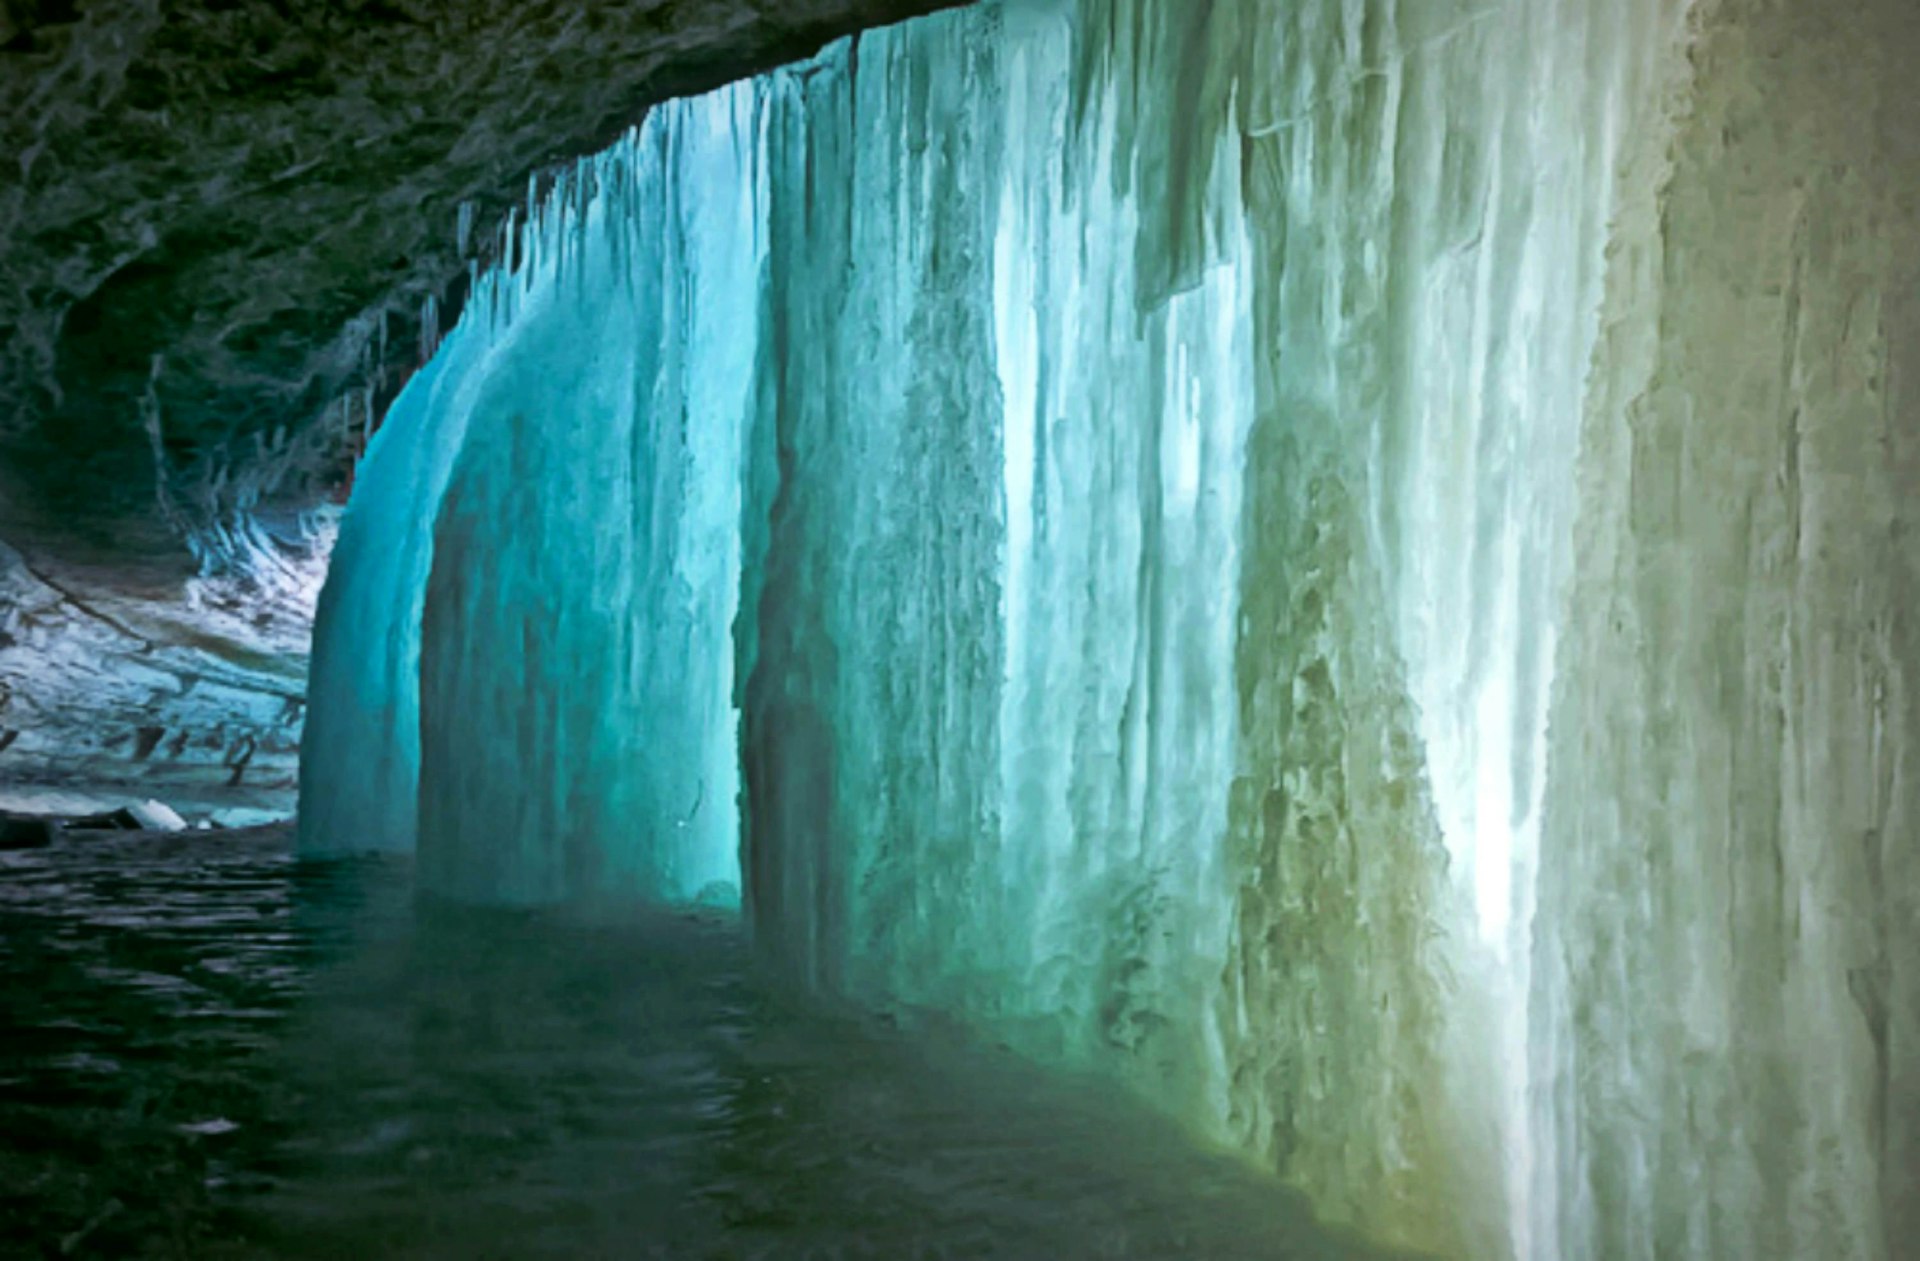 Ice cave behind the frozen water of Minnehaha Falls near Minneapolis